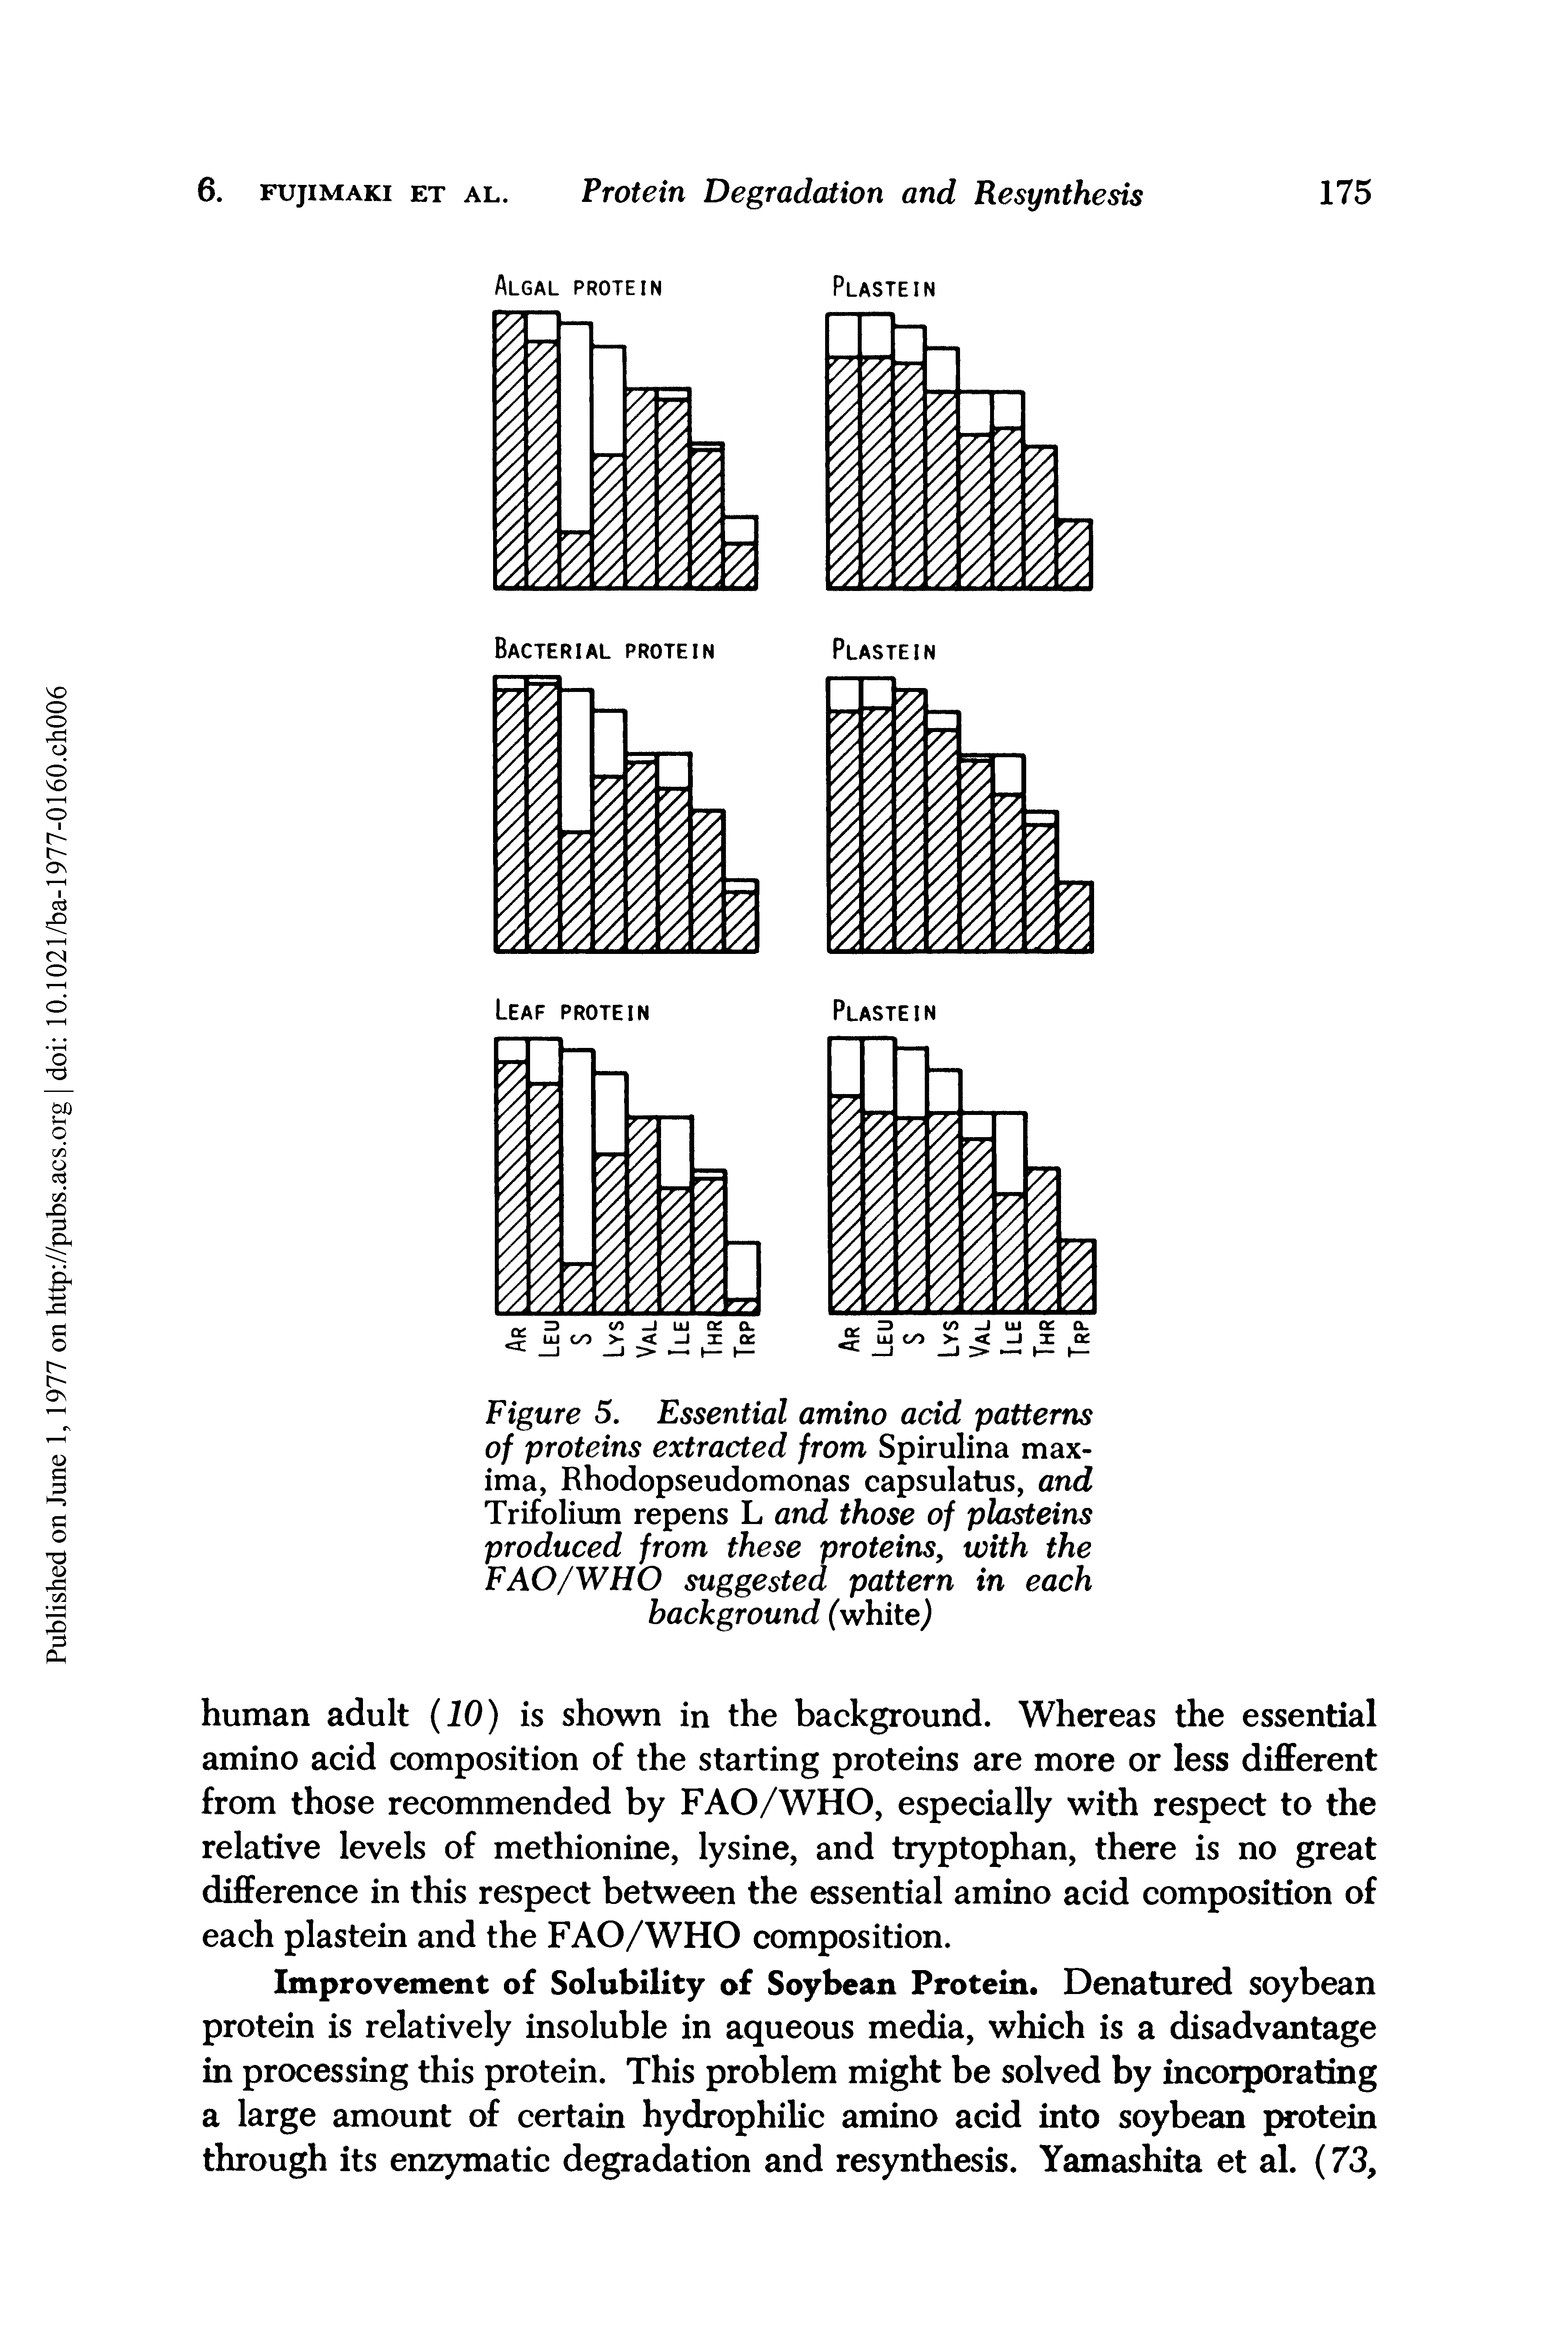 Figure 5. Essential amino acid patterns of proteins extracted from Spirulina maxima, Rhodopseudomonas capsulatus, and Trifolium repens L and those of plasteins produced from these proteins, with the FAO/WHO suggested pattern in each background (white)...